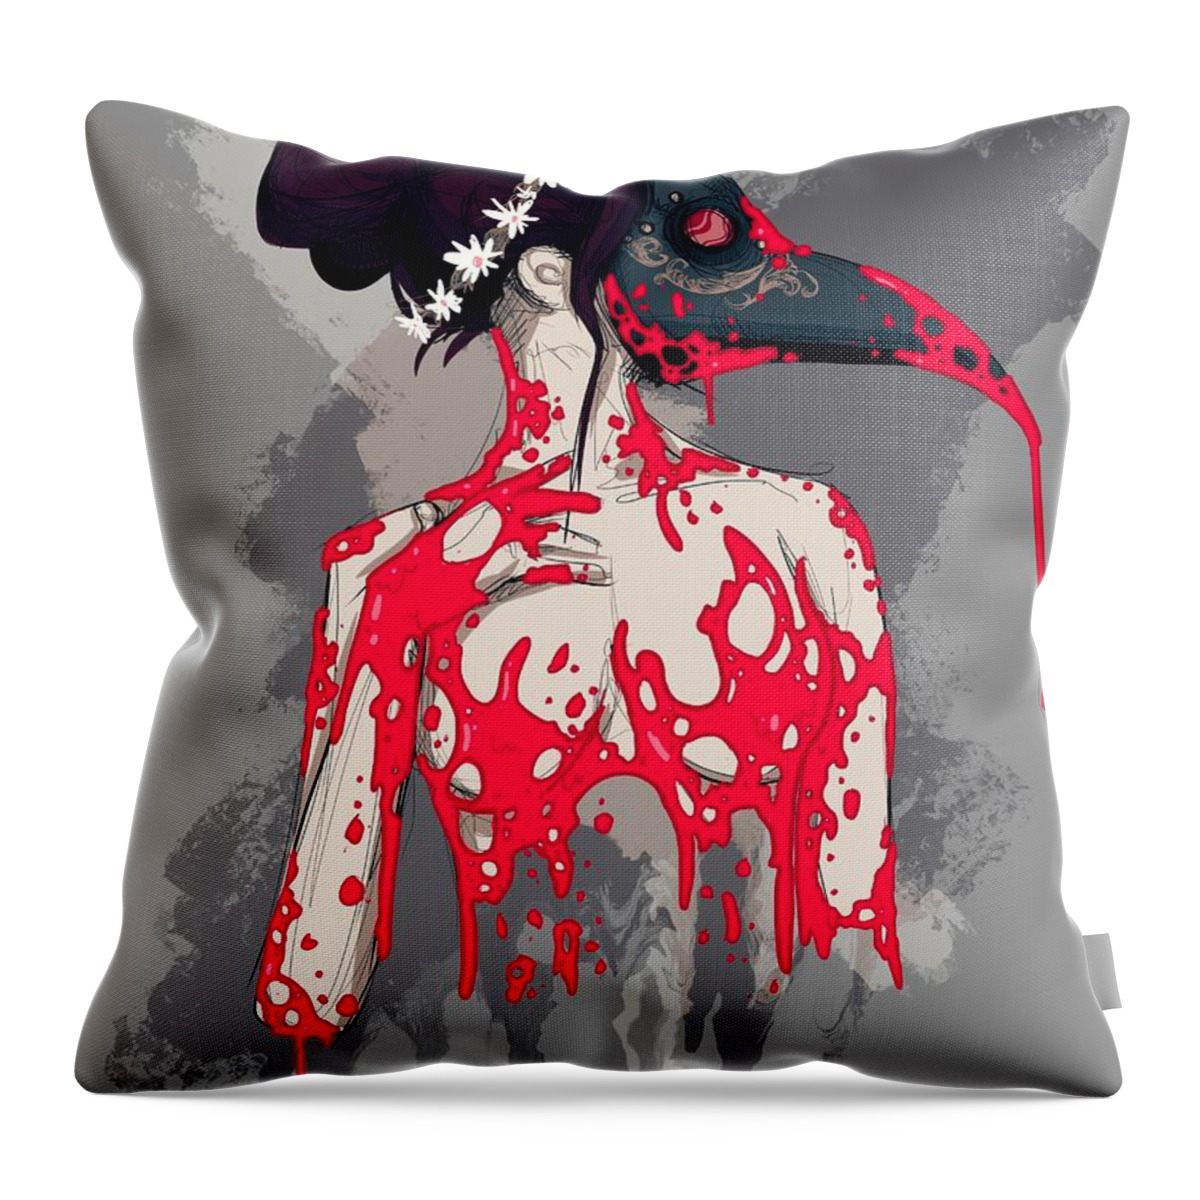 Plague Doctor Throw Pillow featuring the drawing I Hope You Suffer by Ludwig Van Bacon